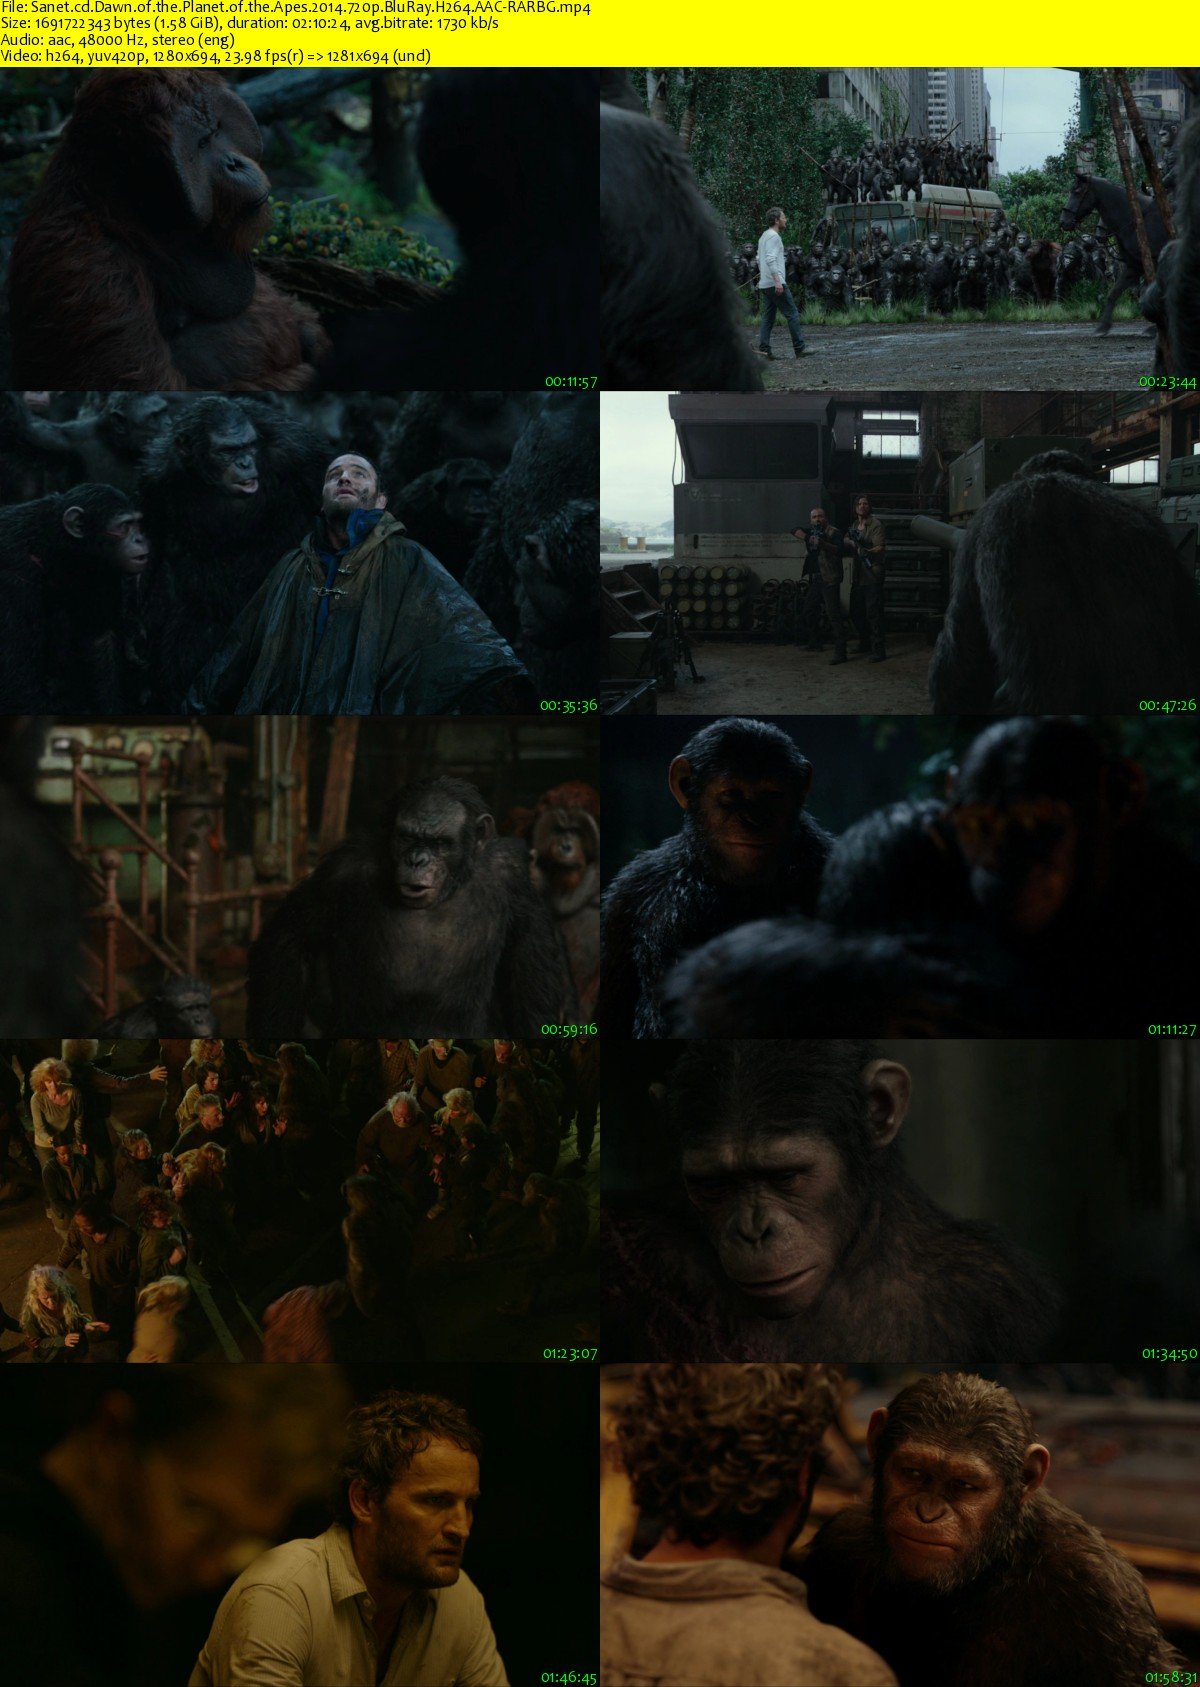 dawn of the planet of the apes movie download in hindi hd